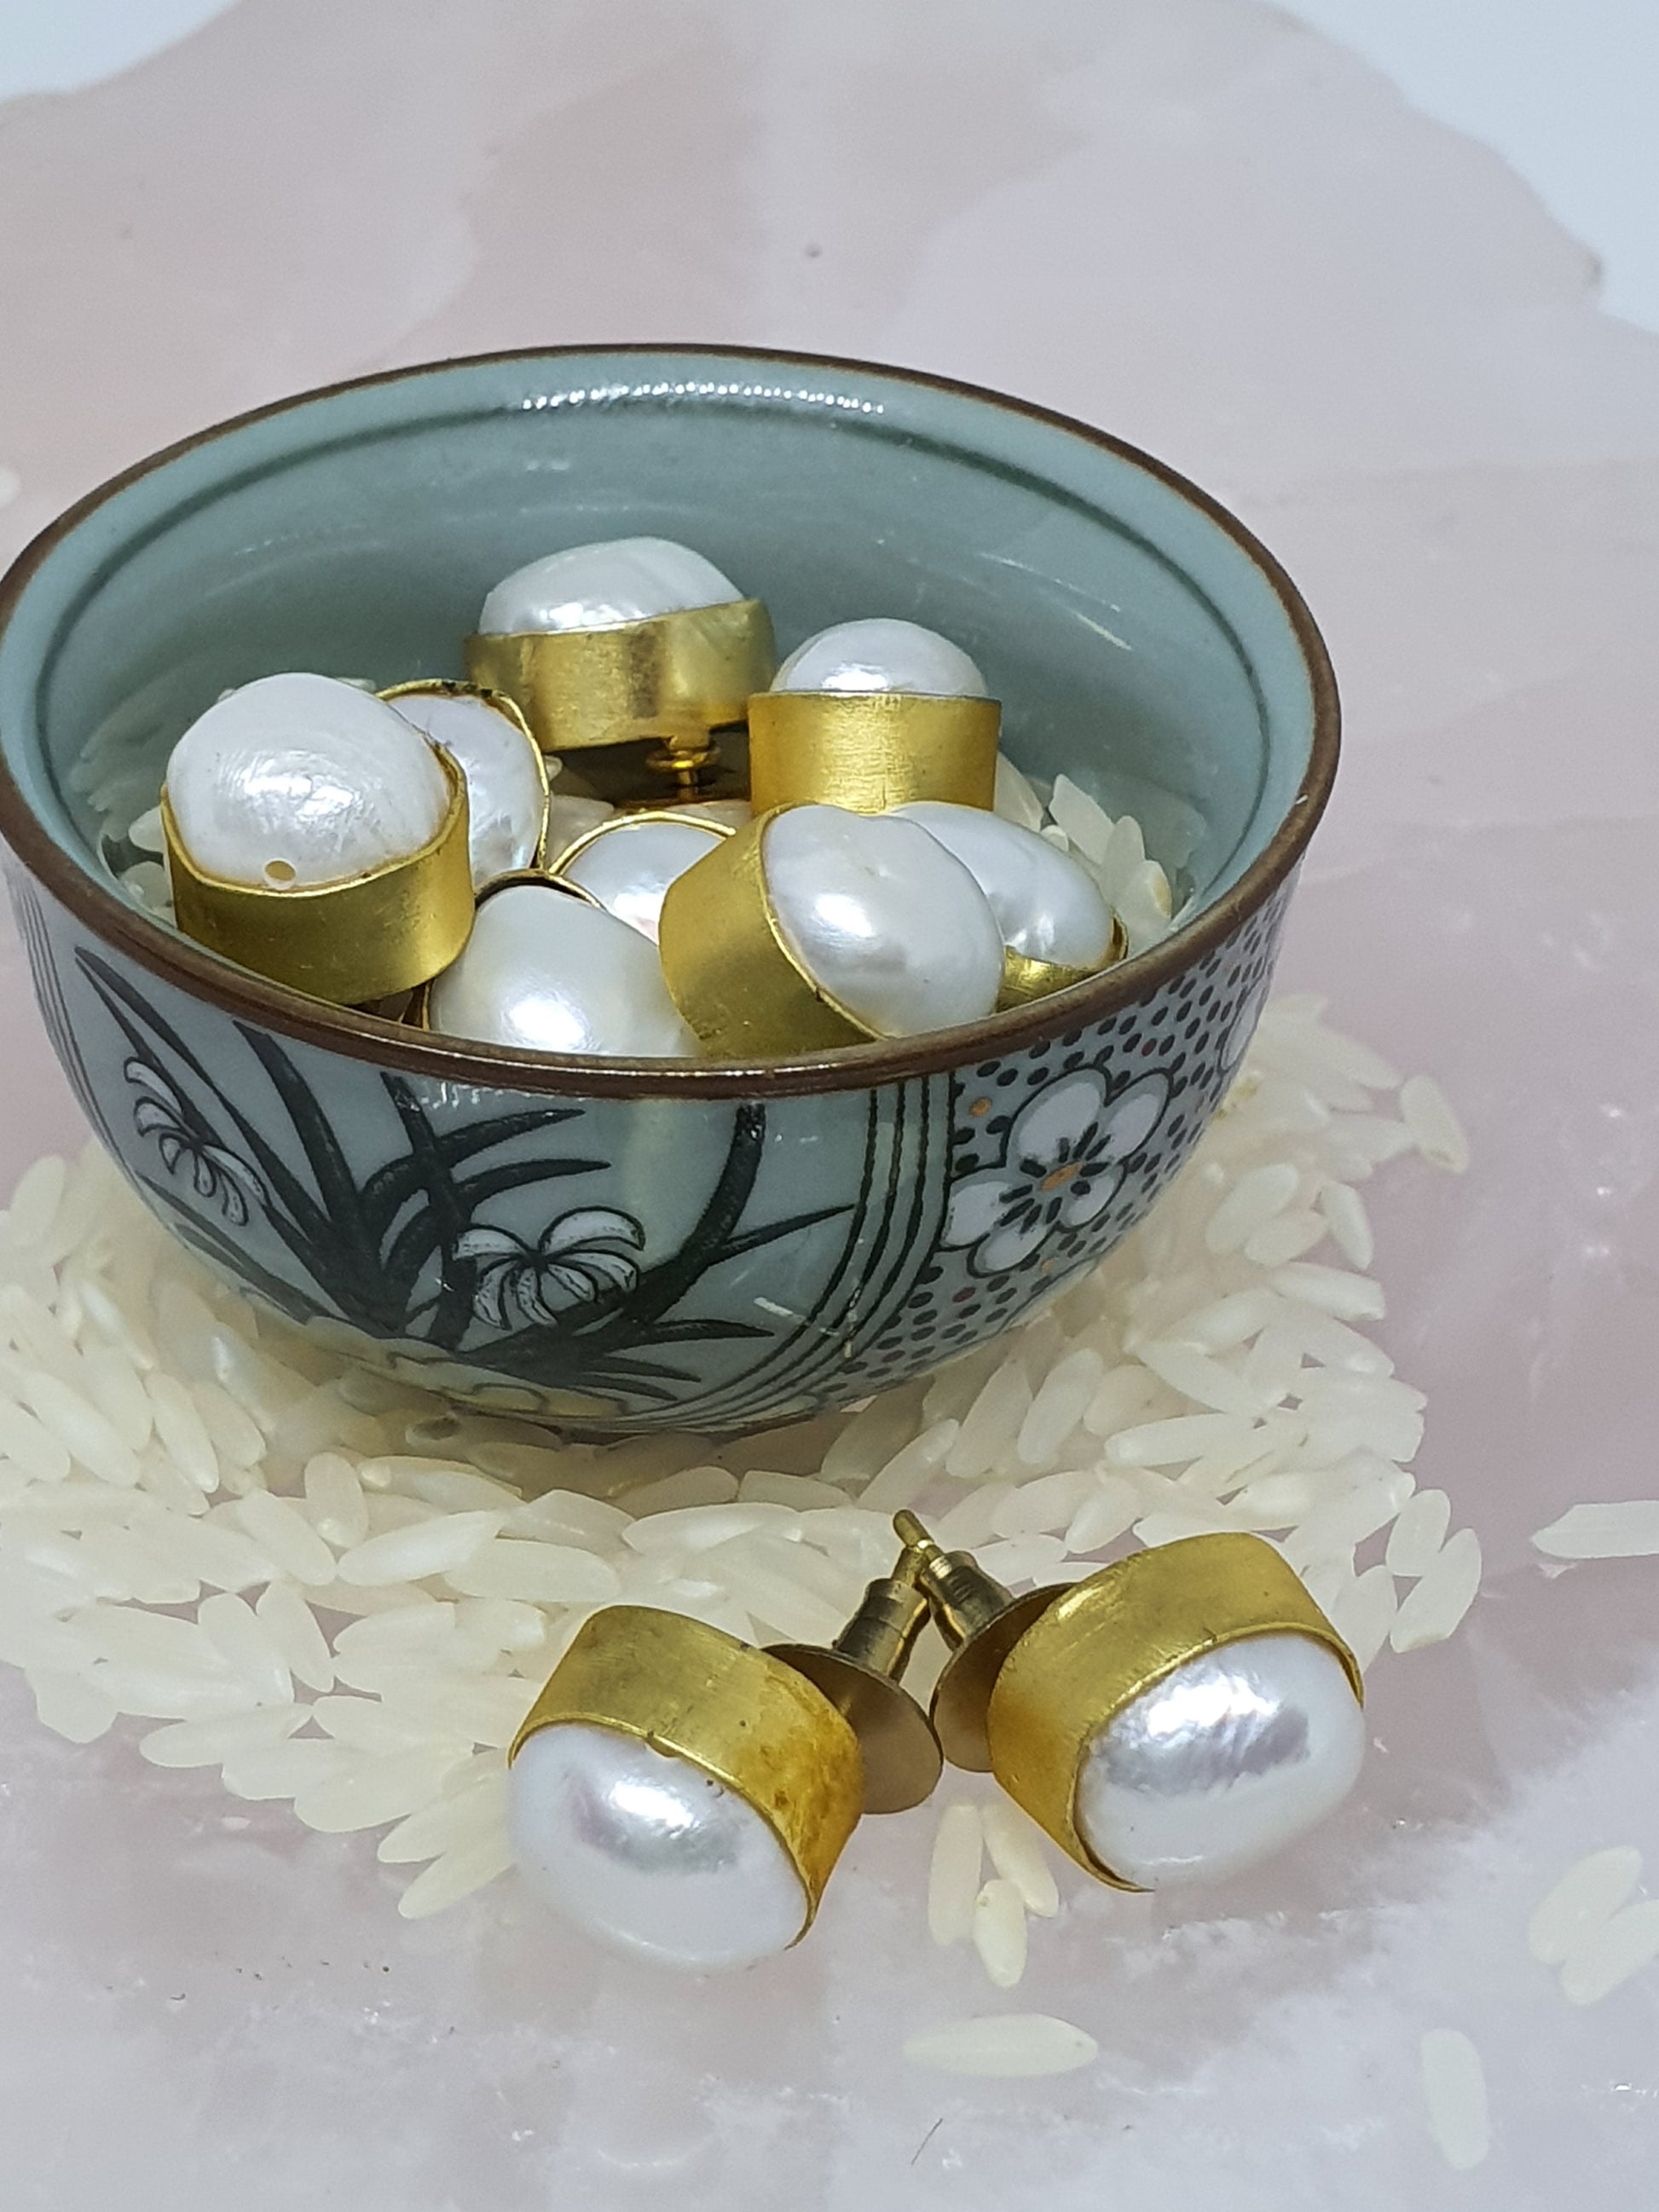 A small bowl of pearl stud earrings